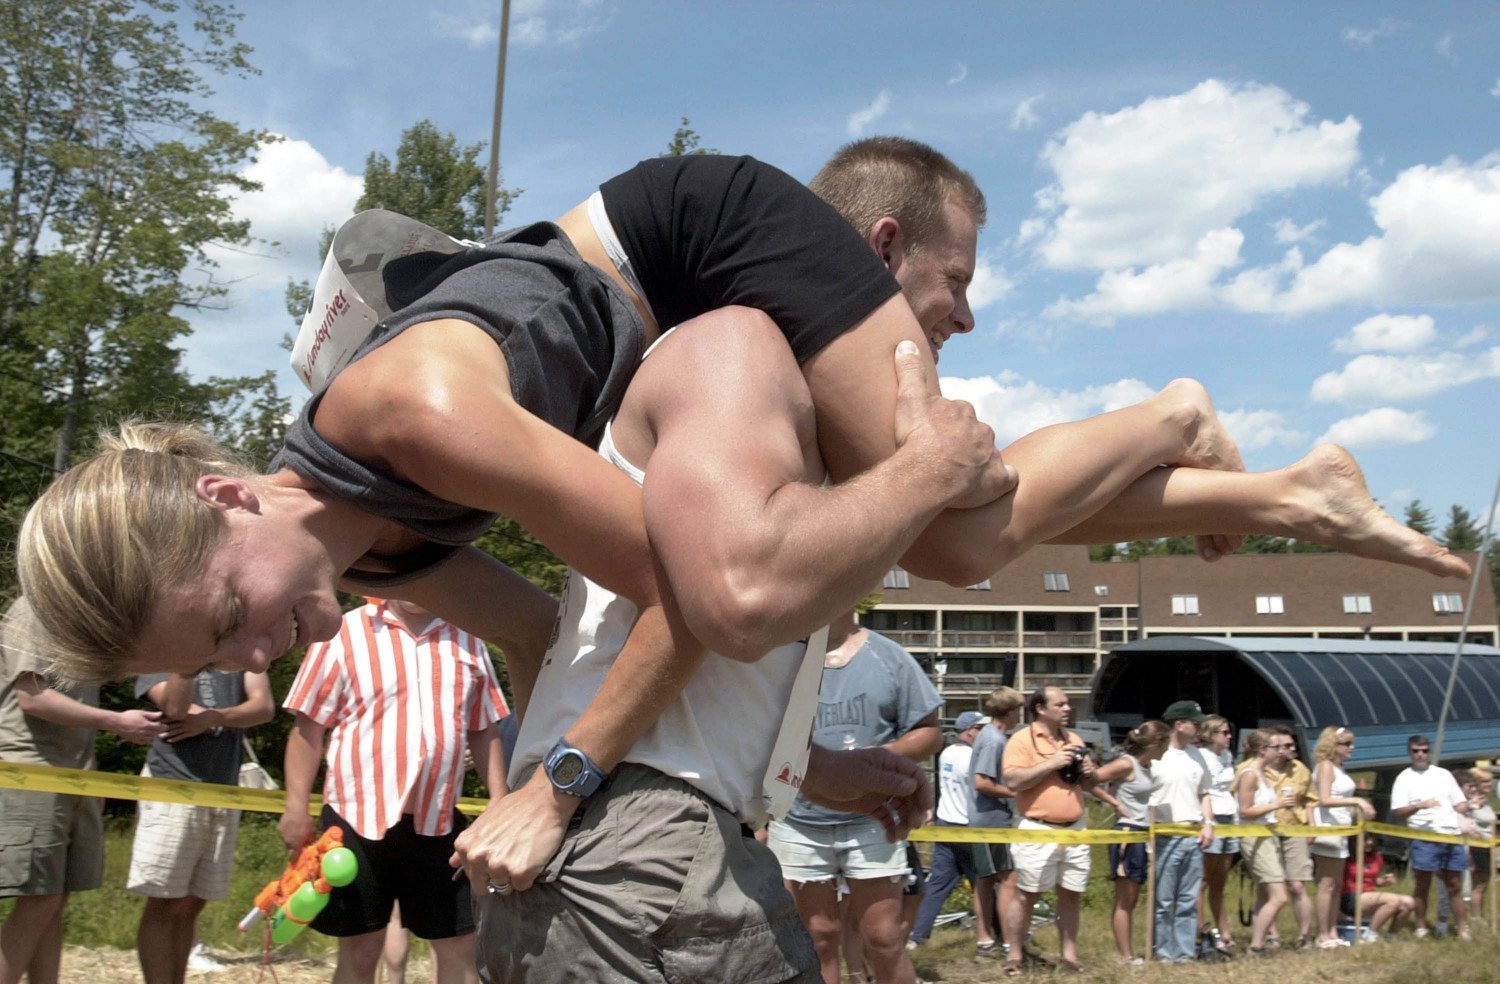 Wife Carrying Contest